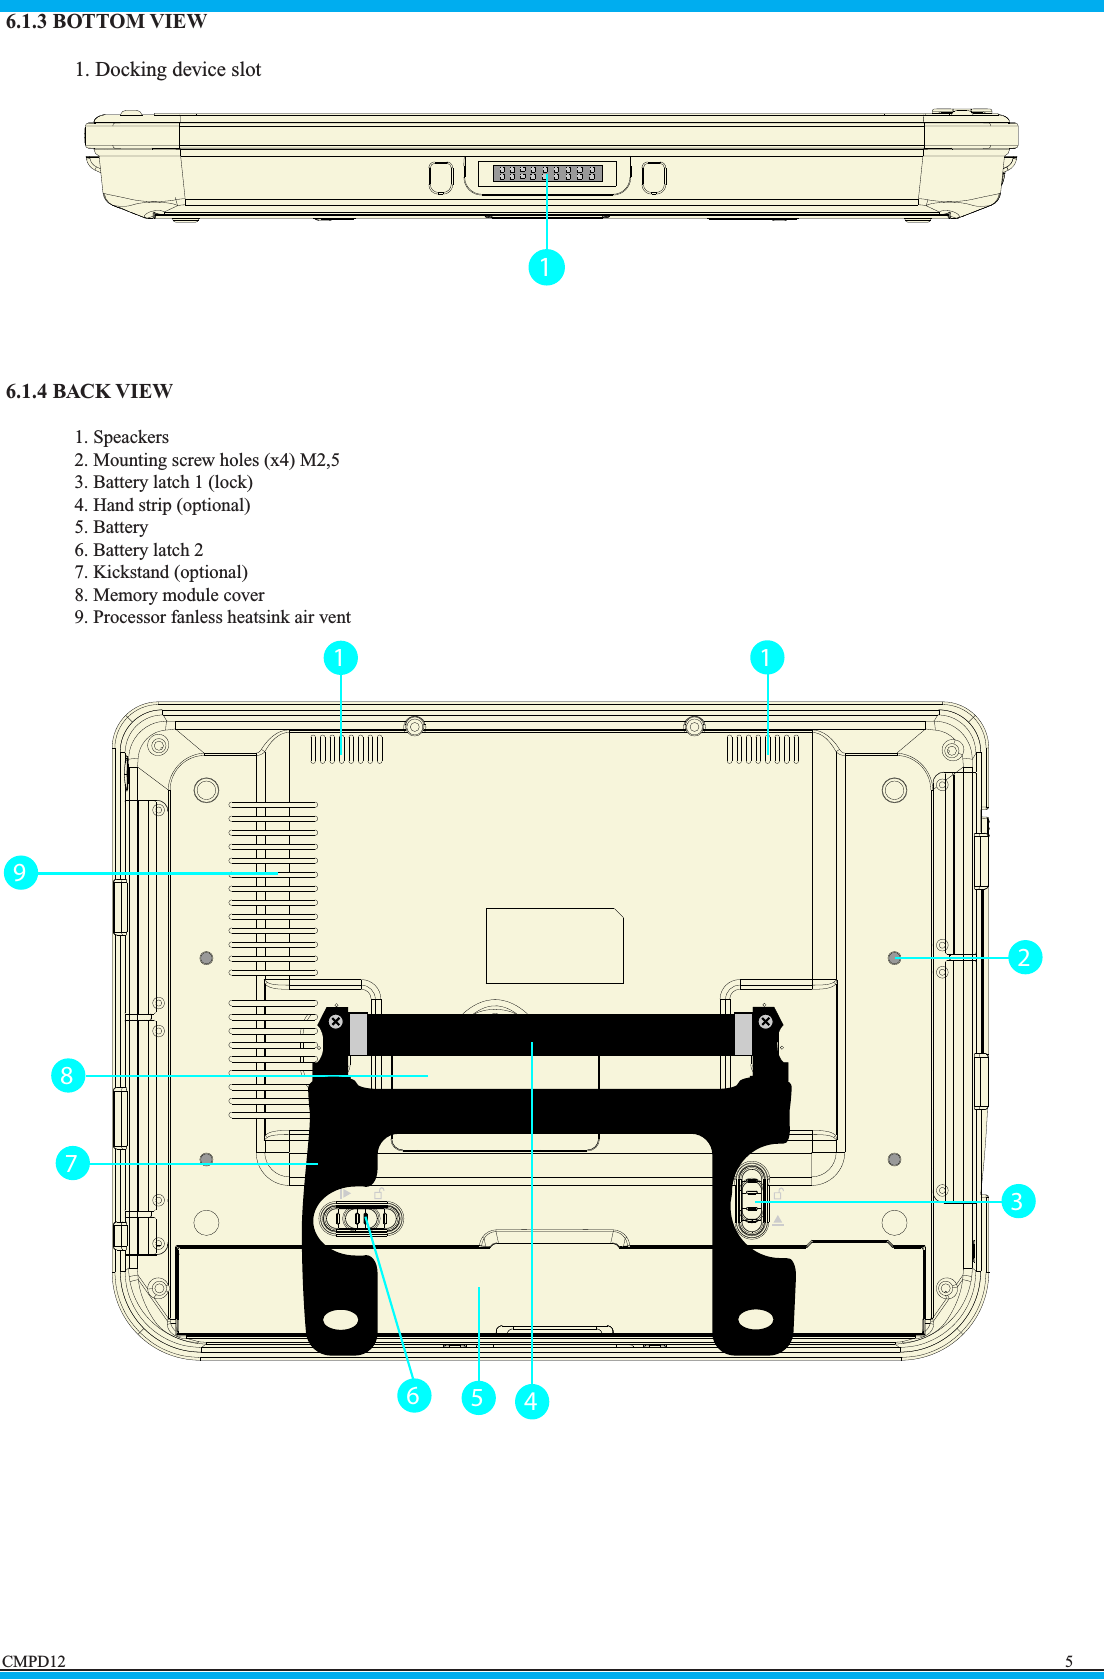 5CMPD121 6.1.3 BOTTOM VIEW 1. Docking device slot 6.1.4 BACK VIEW  1. Speackers  2. Mounting screw holes (x4) M2,5    3. Battery latch 1 (lock)  4. Hand strip (optional)  5. Battery  6. Battery latch 2  7. Kickstand (optional)  8. Memory module cover  9. Processor fanless heatsink air vent13911256847